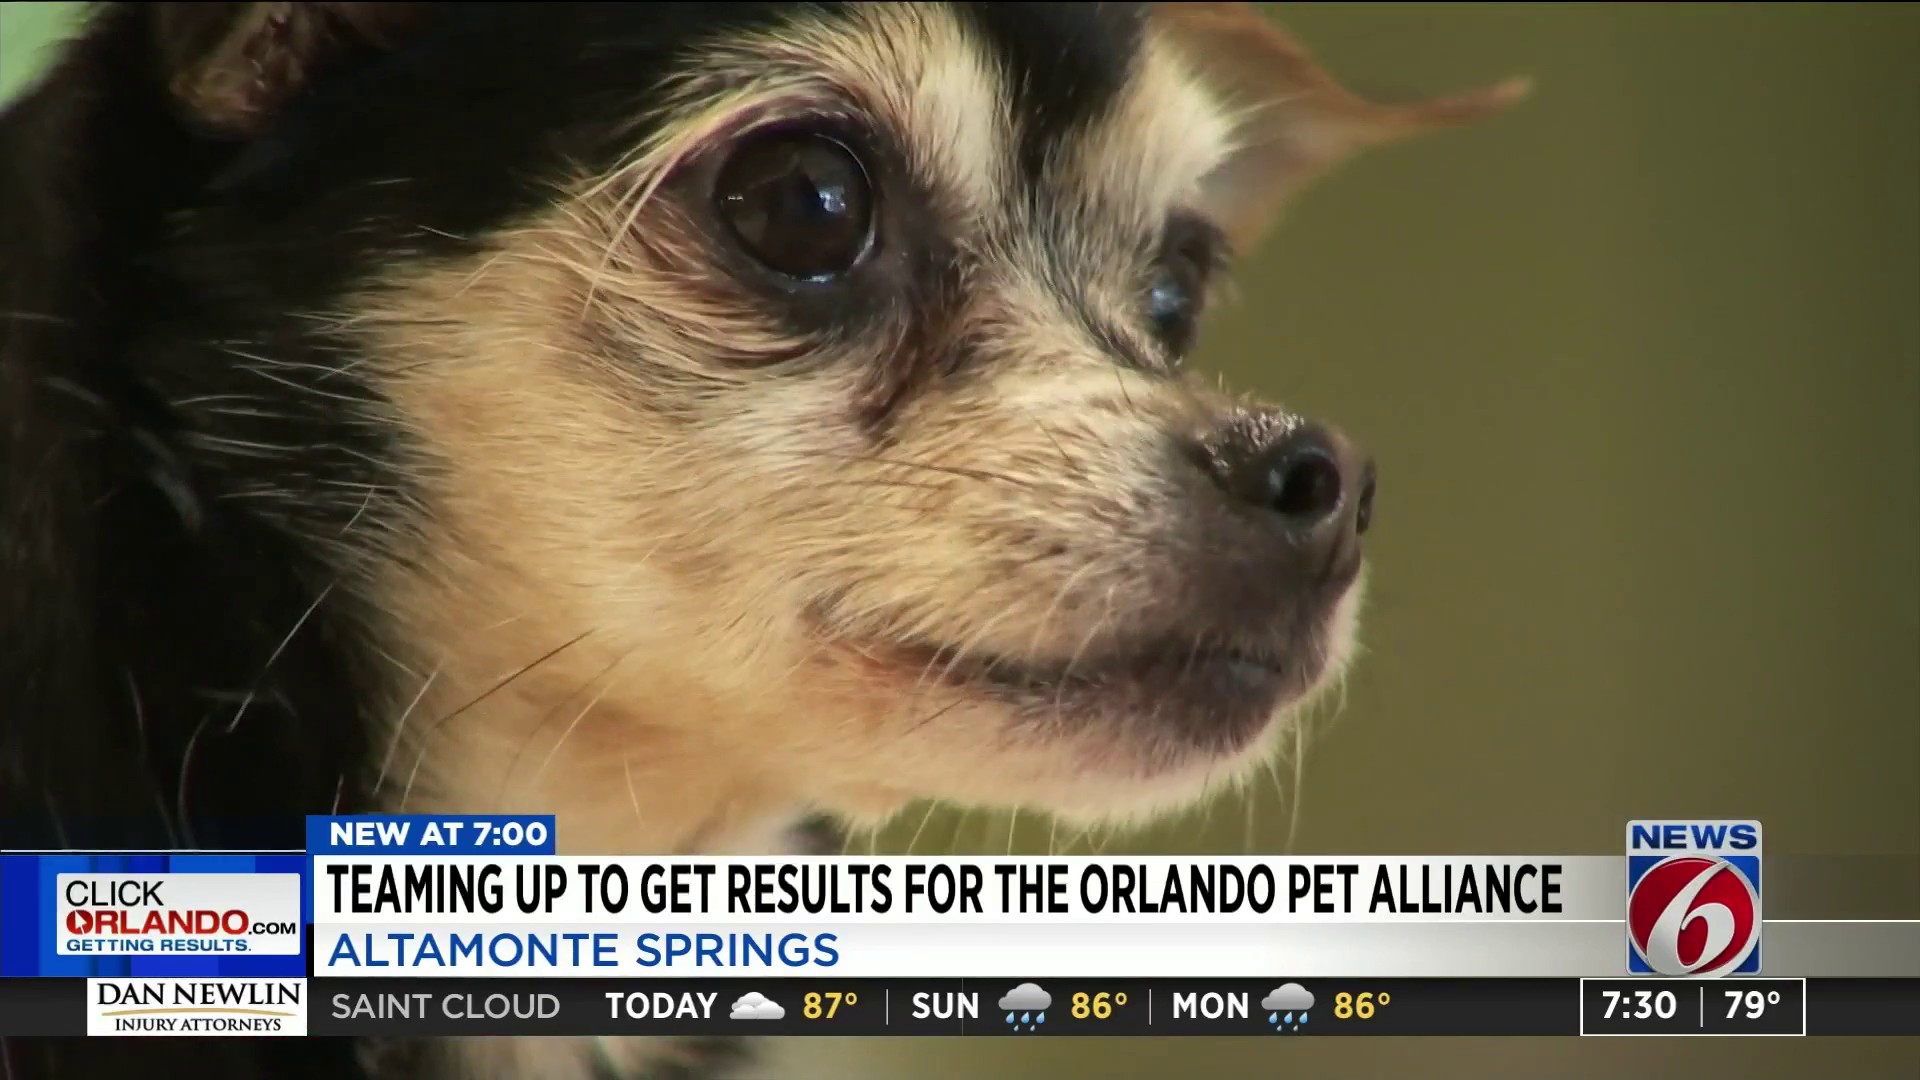 Jared's offers discounts with donations toward Pet Alliance in Orlando